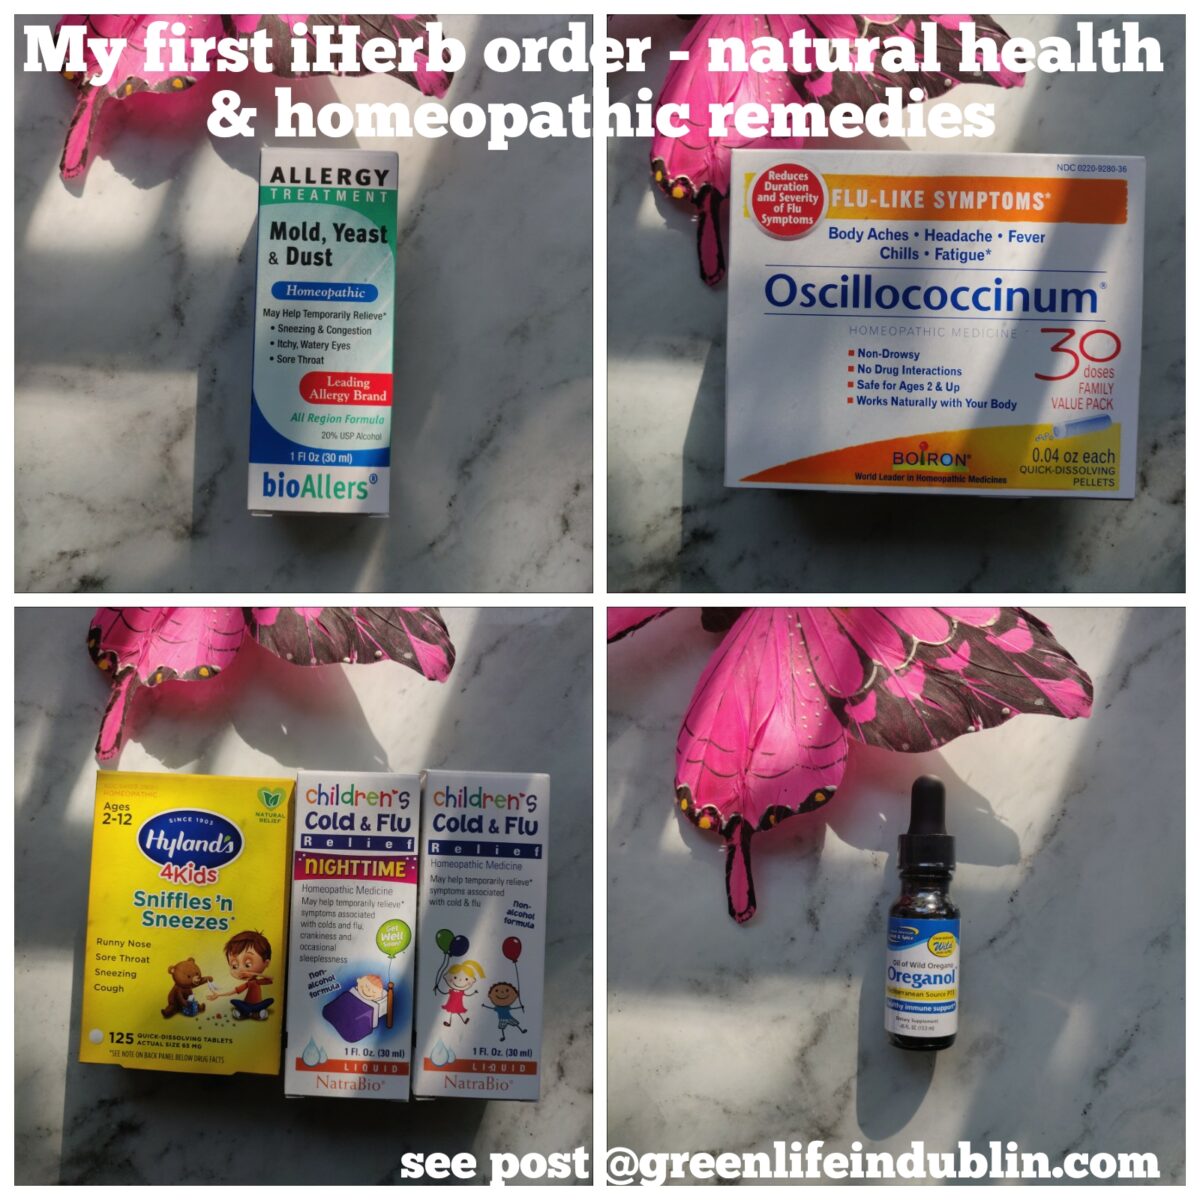 My first iHerb order - natural & homeopathic remedies